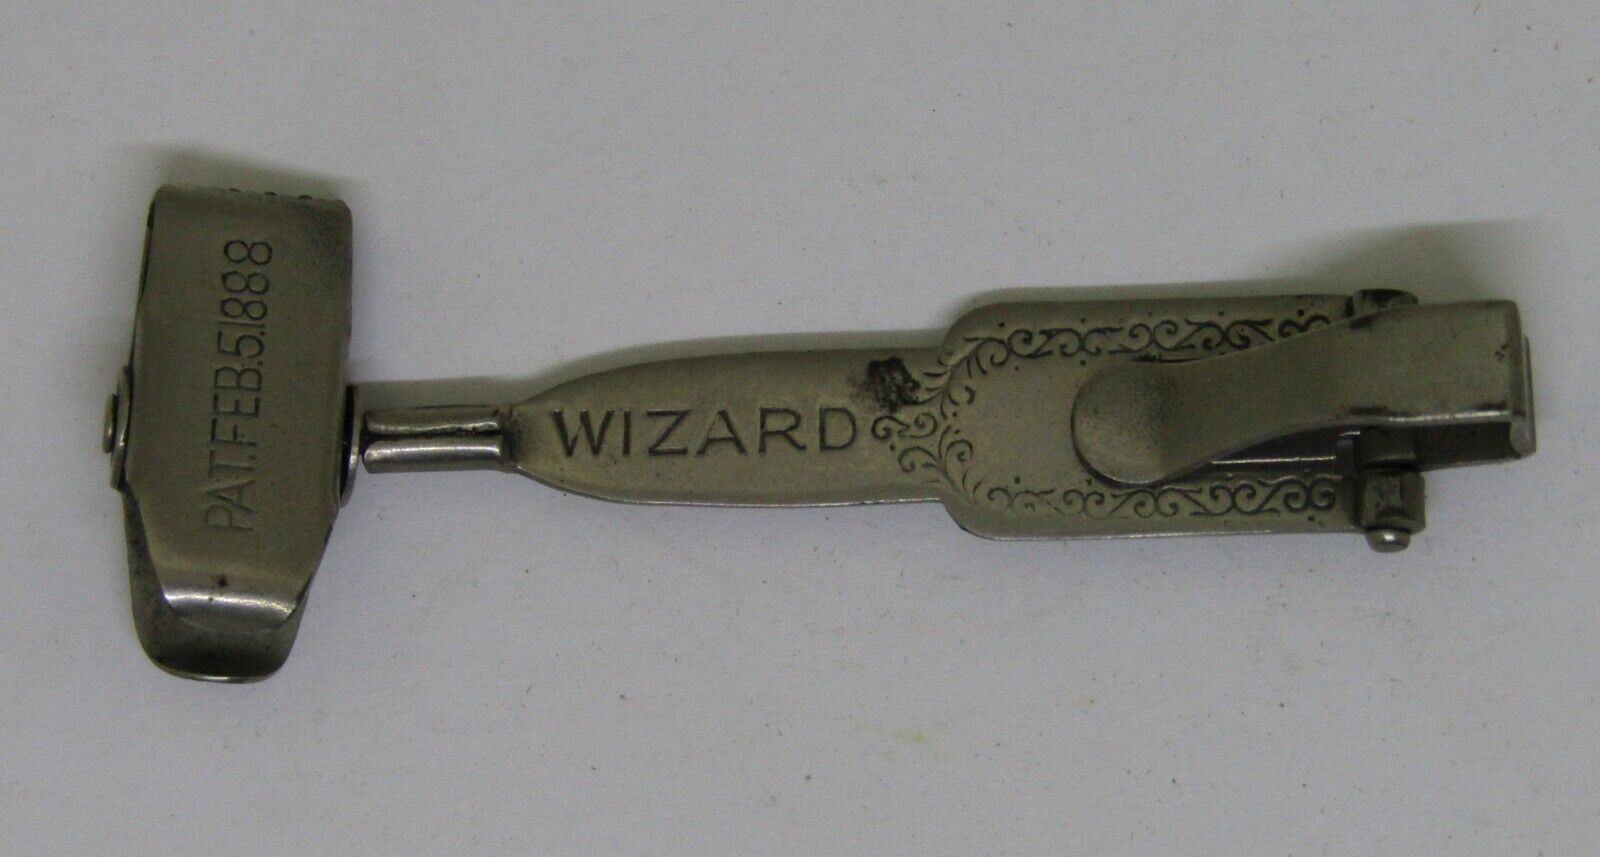 Vintage Wizard Gambler Magician Trick Card Hold Out Cuff Holder Pat. Feb 5, 1888